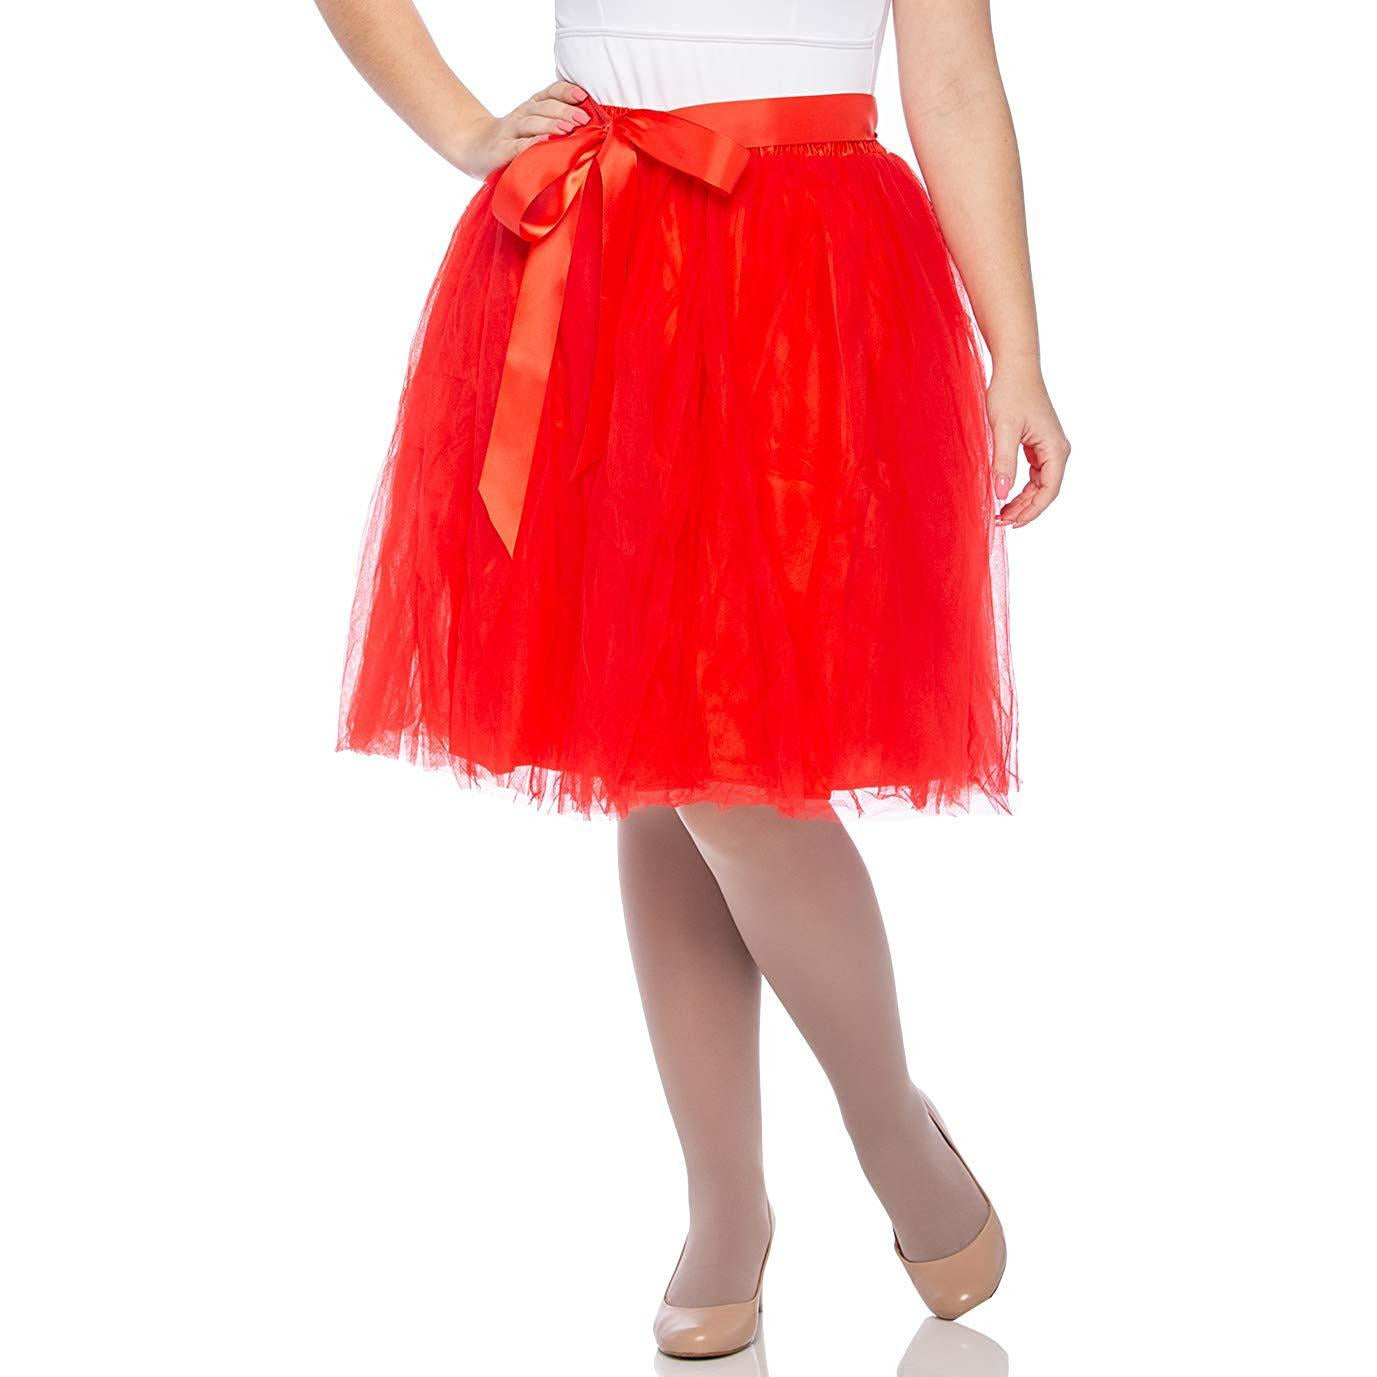 Adults & Girls A-line Knee Length Tutu Tulle Skirt - Regular and Plus Size in Red